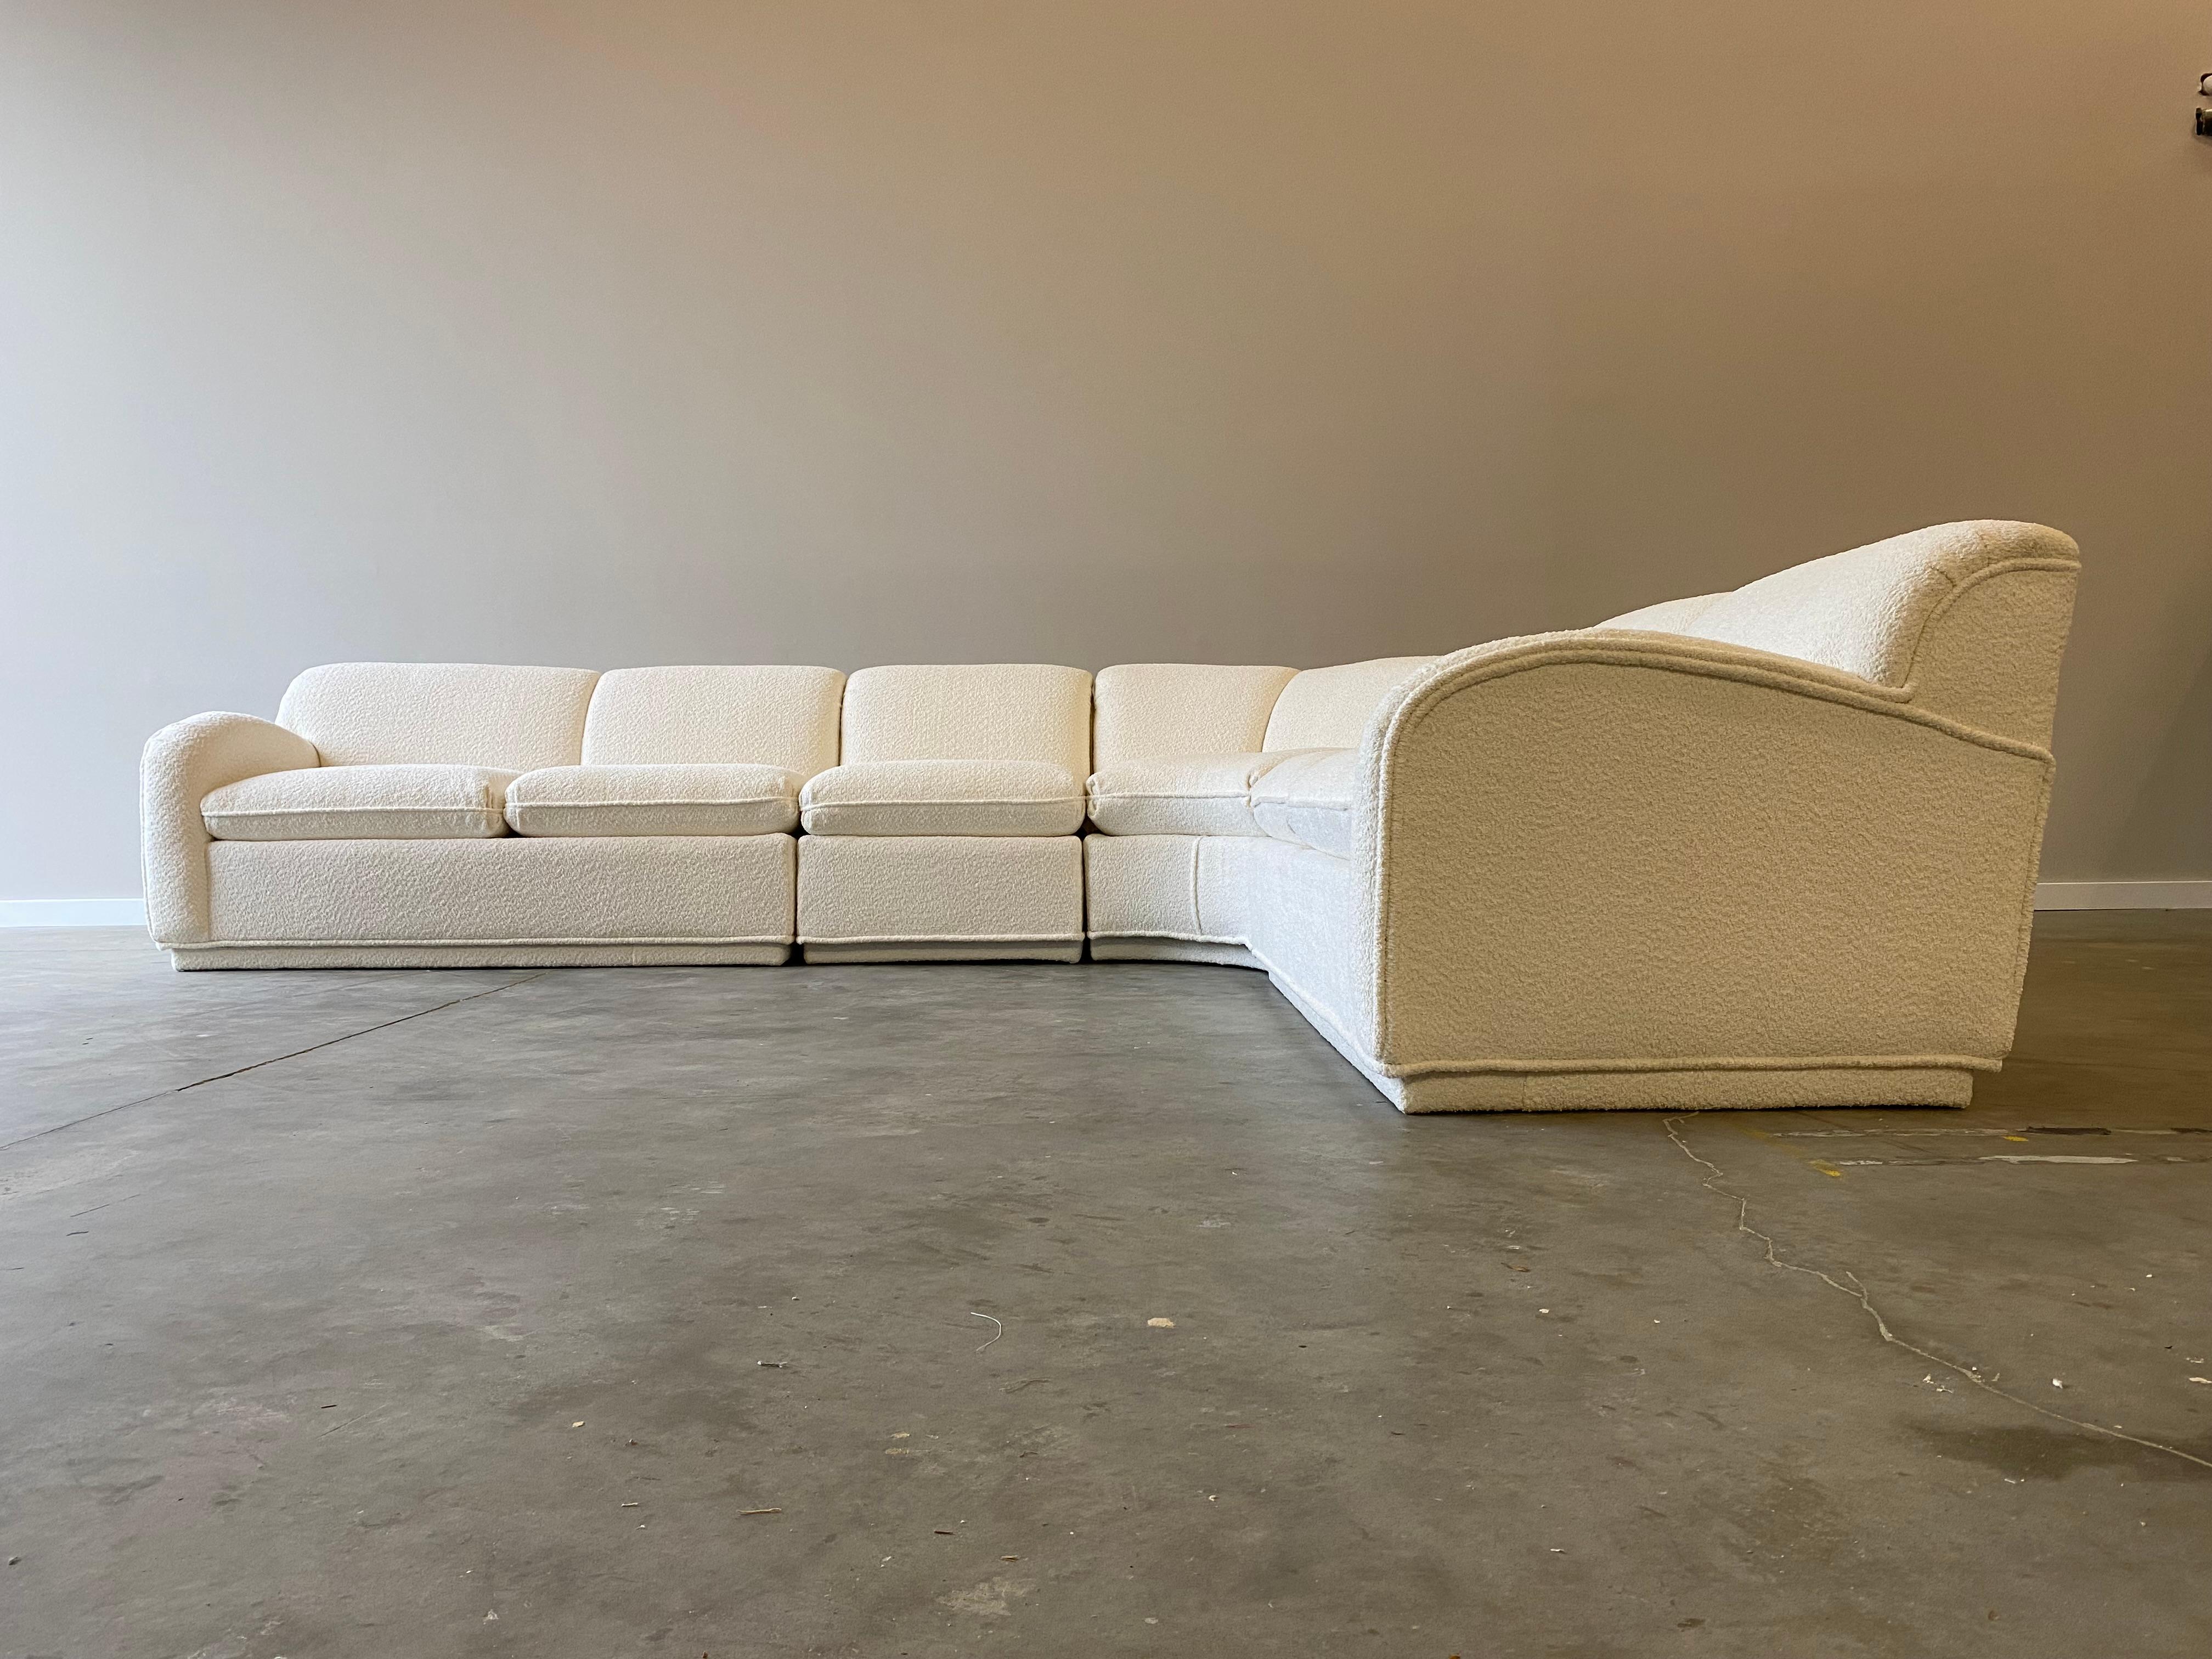 An incredible vintage sofa, newly upholstered in a plush fabric. Unique thick piping and deep comfortable seats to this stunning sofa.

This sectional is four pieces. The smallest piece is 30